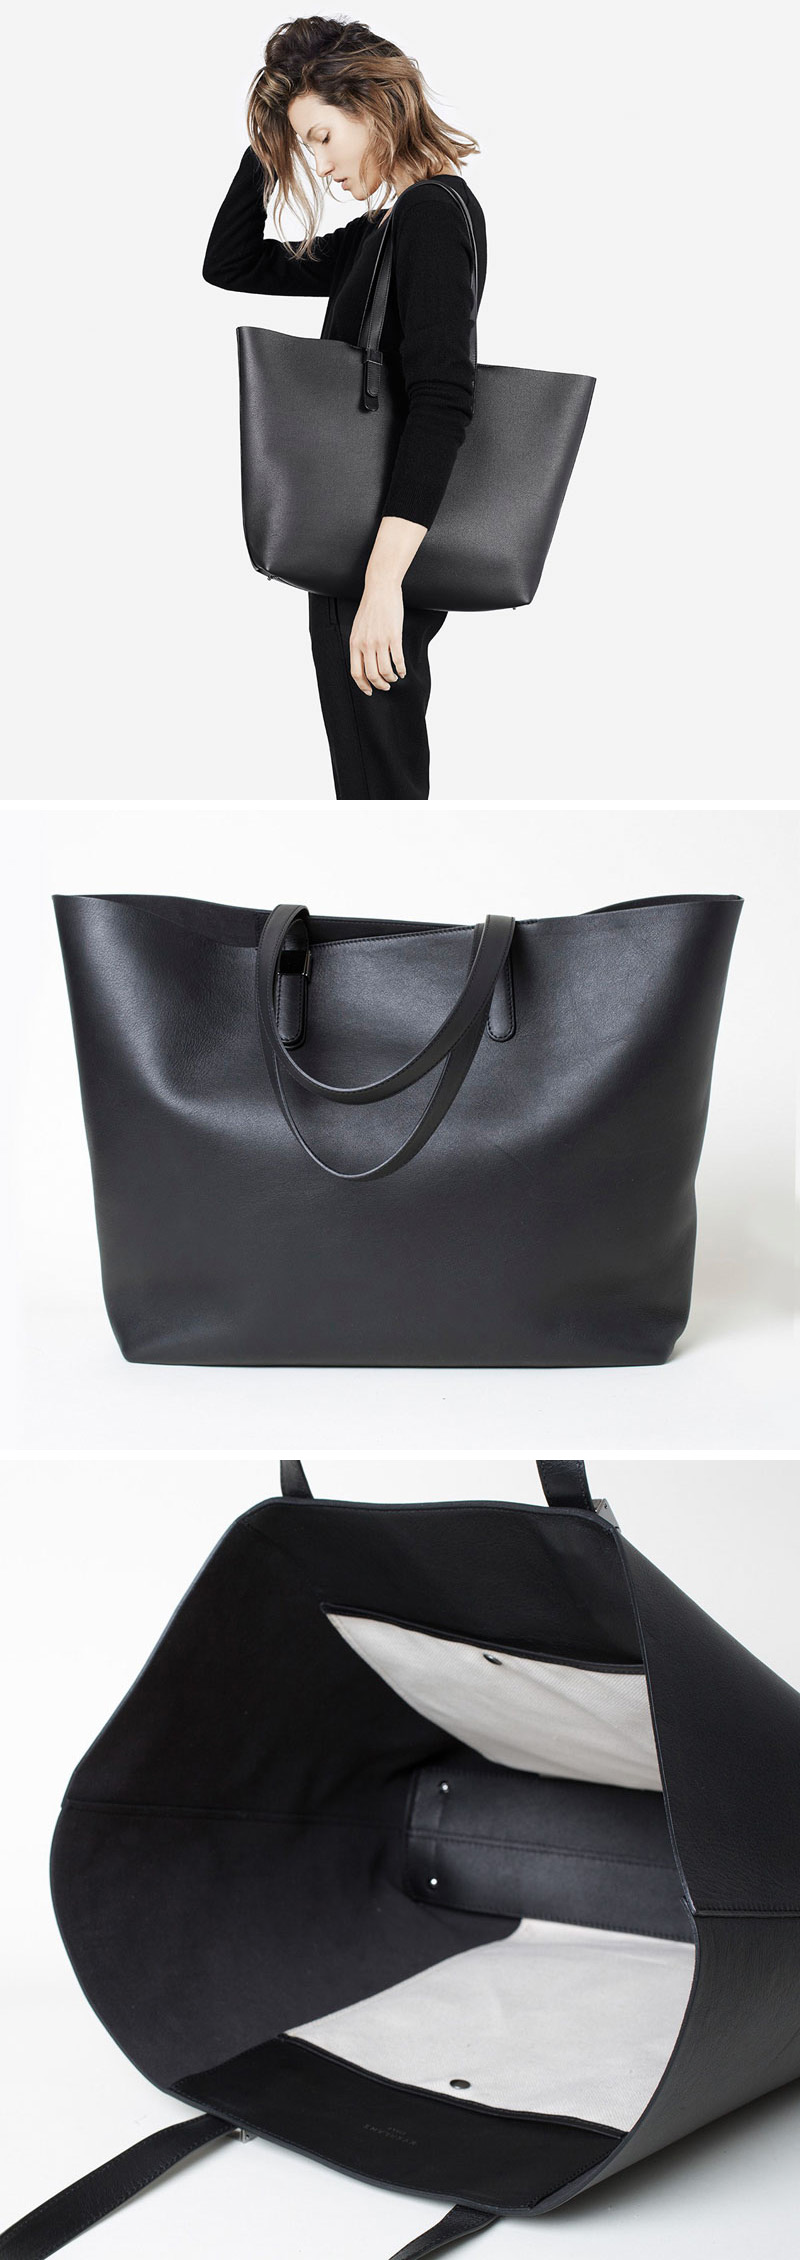  This large modern black leather tote has small feet on the bottom so you don't have to worry about setting it down on the floor.